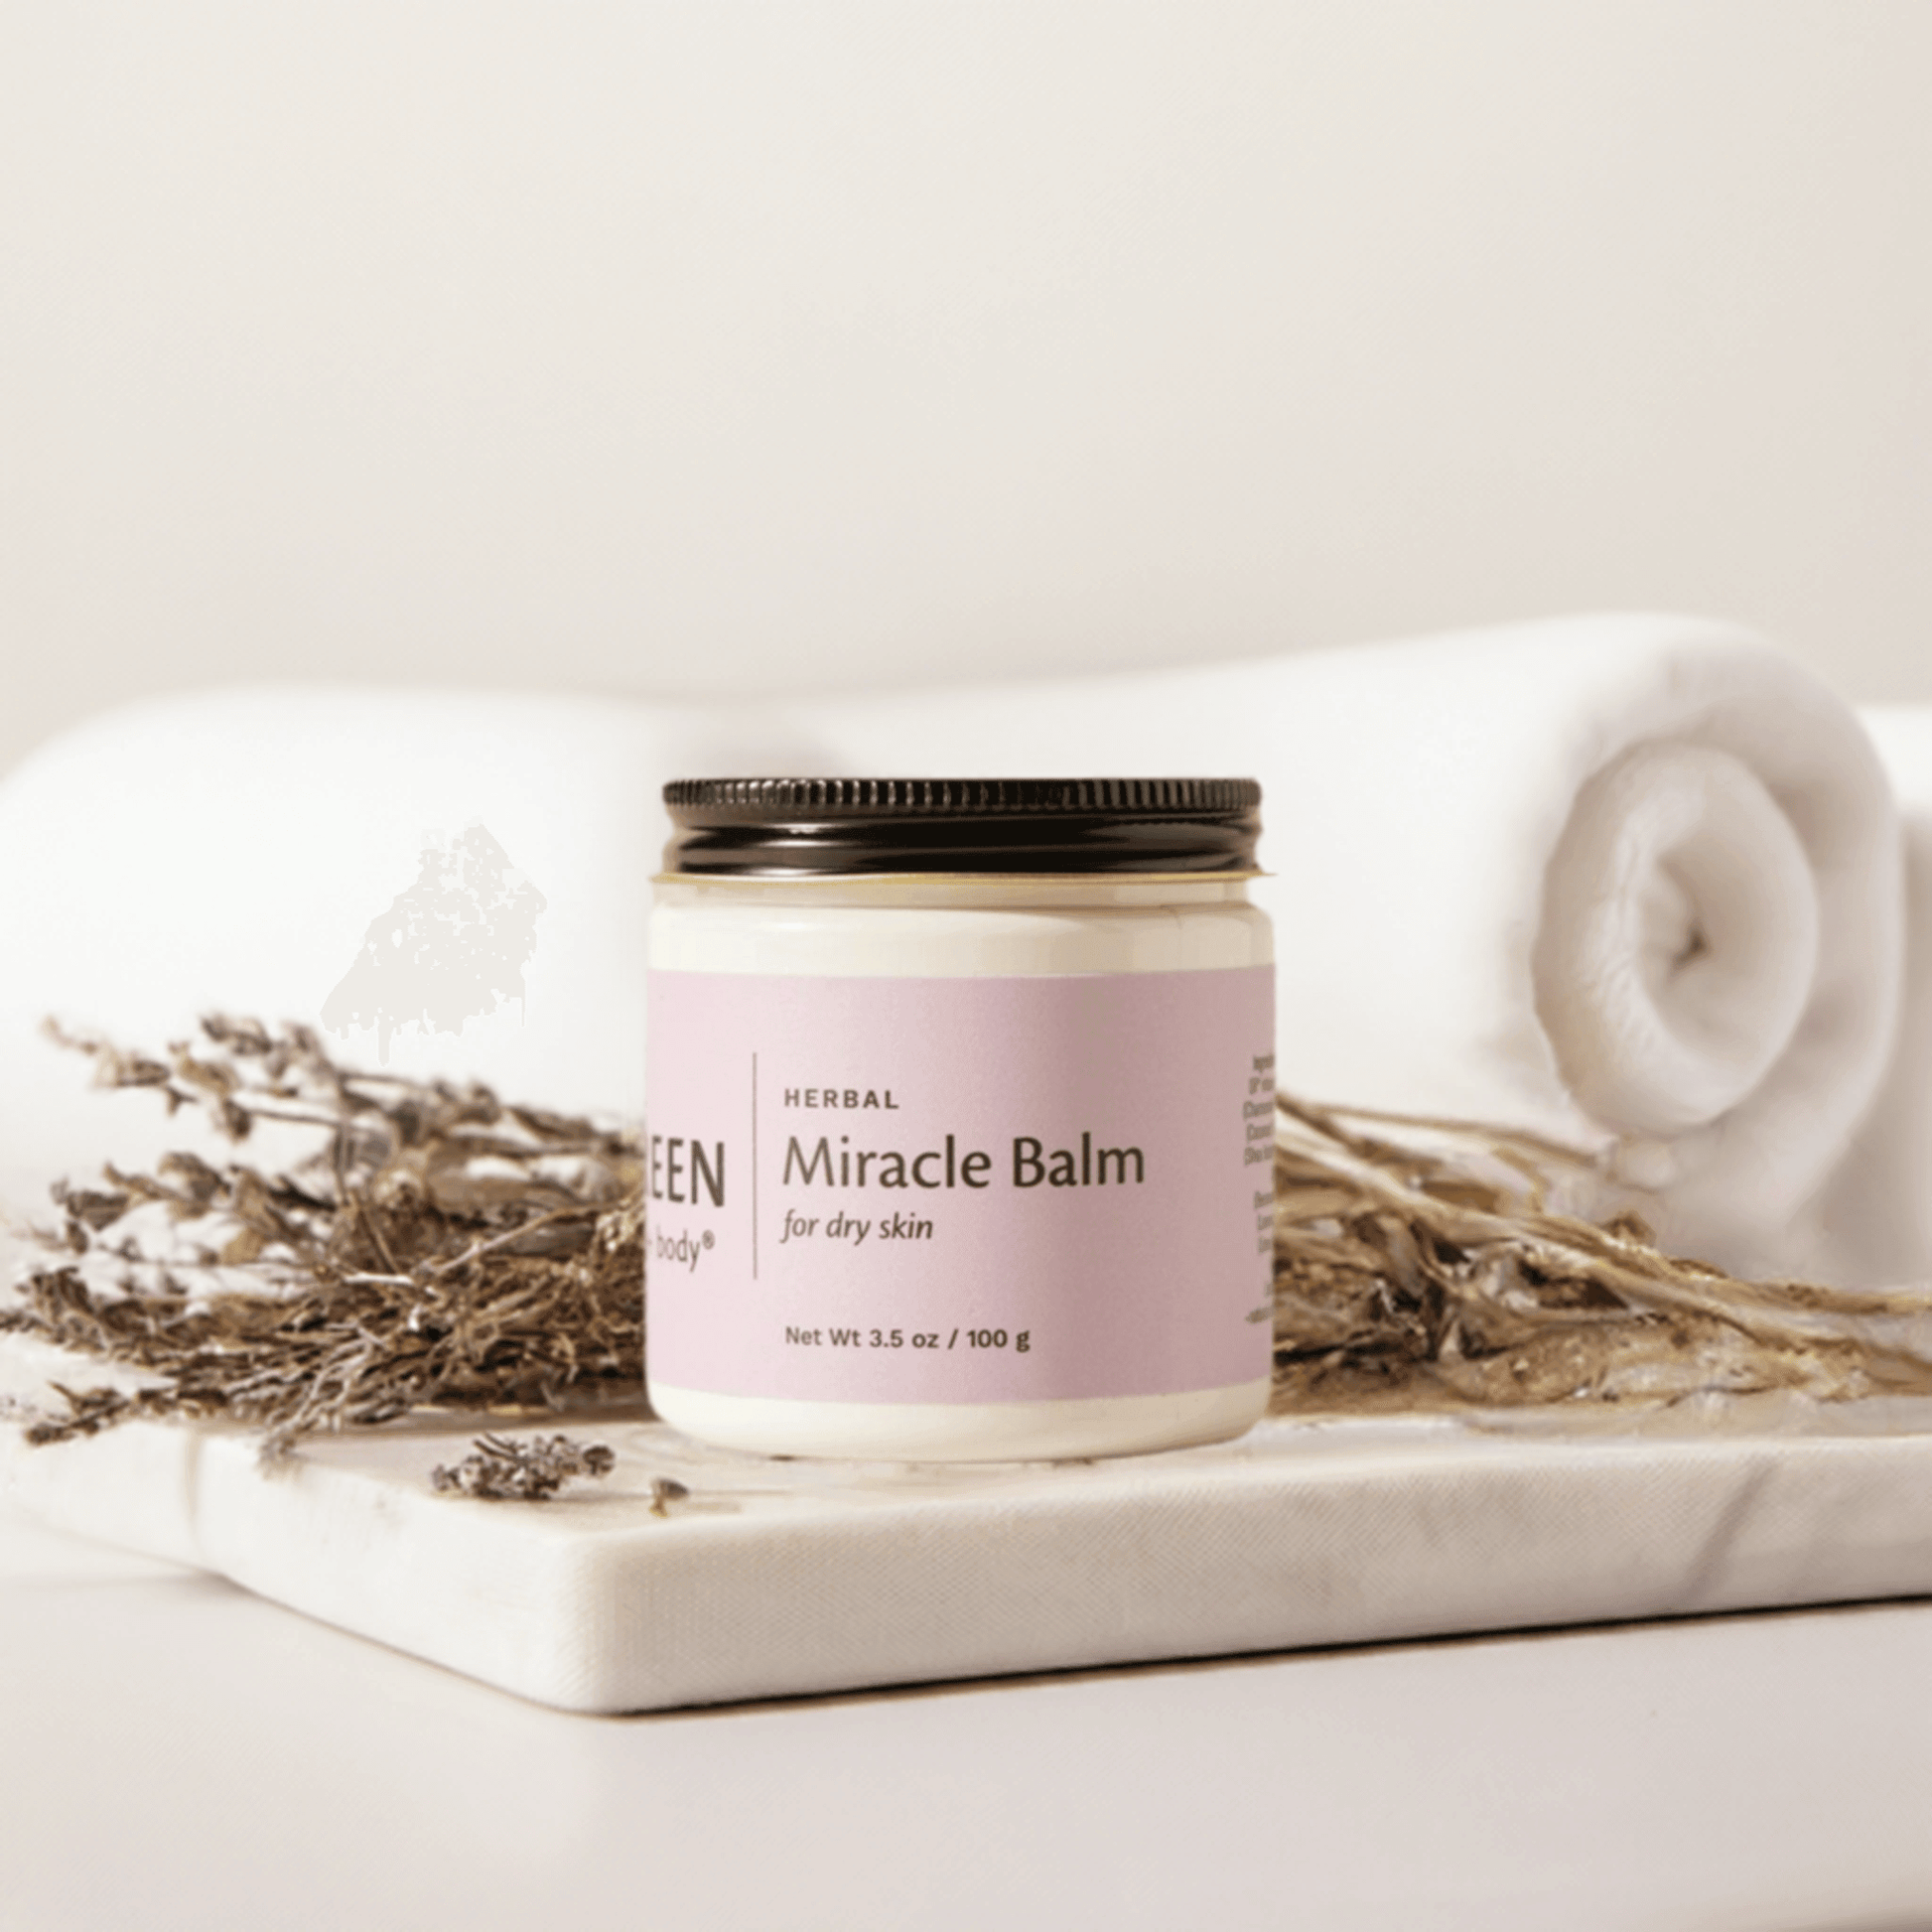 Herbal Miracle Balm for dry skin made with natural ingredients